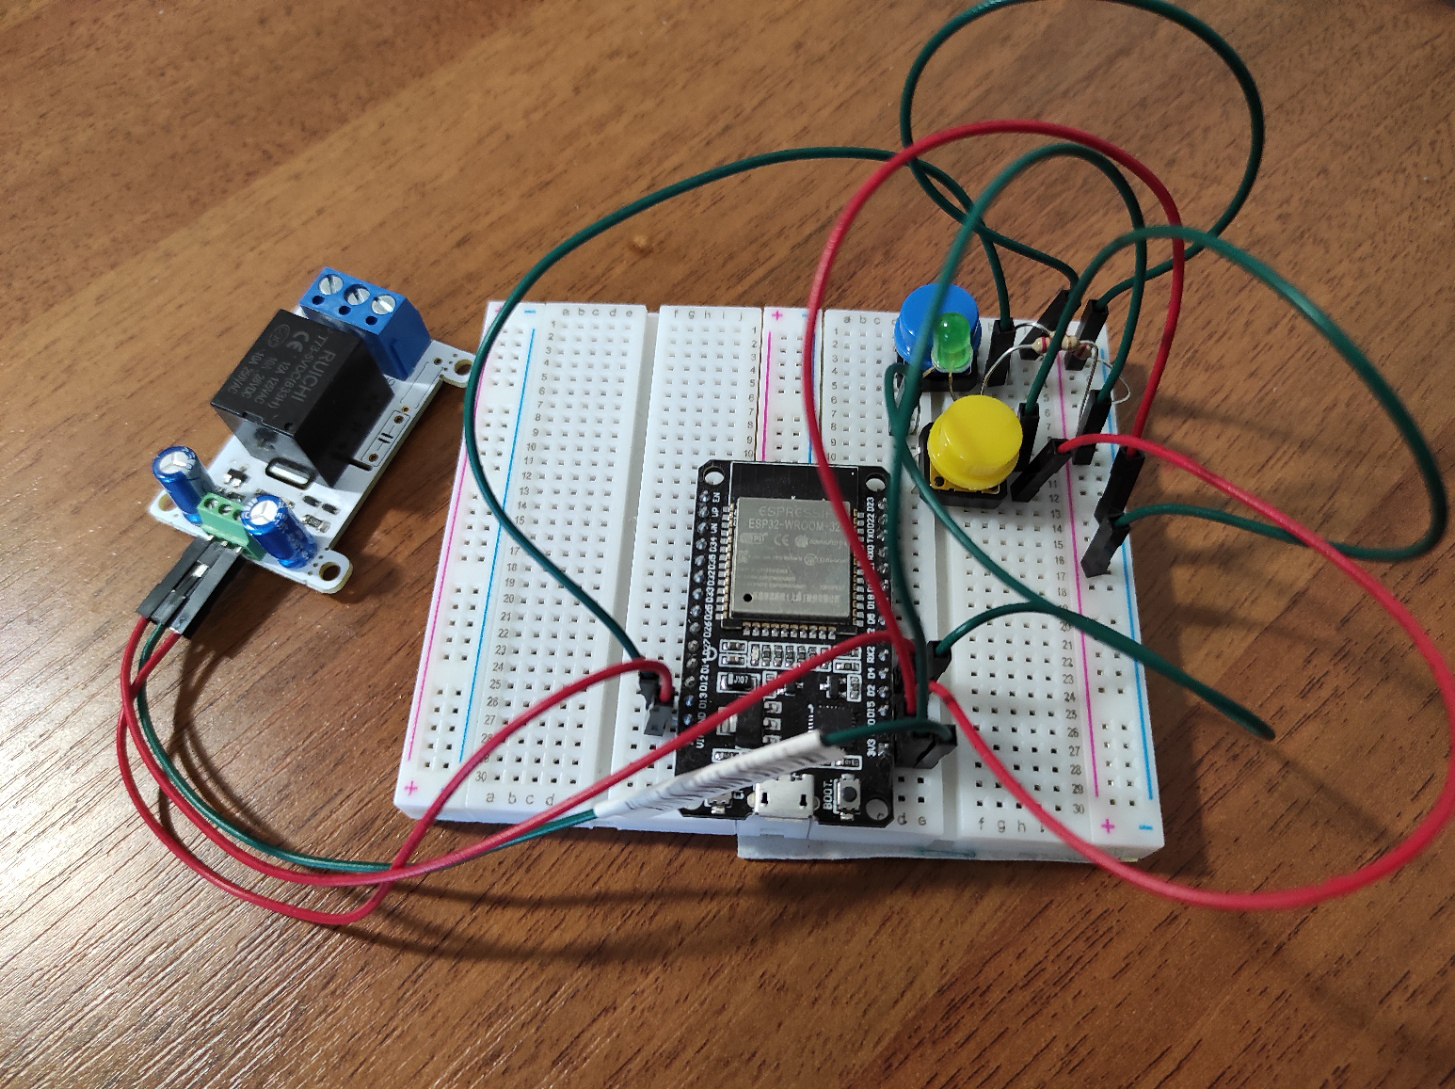 Prototype Wi-Fi relay based on the ESP32 microcontroller